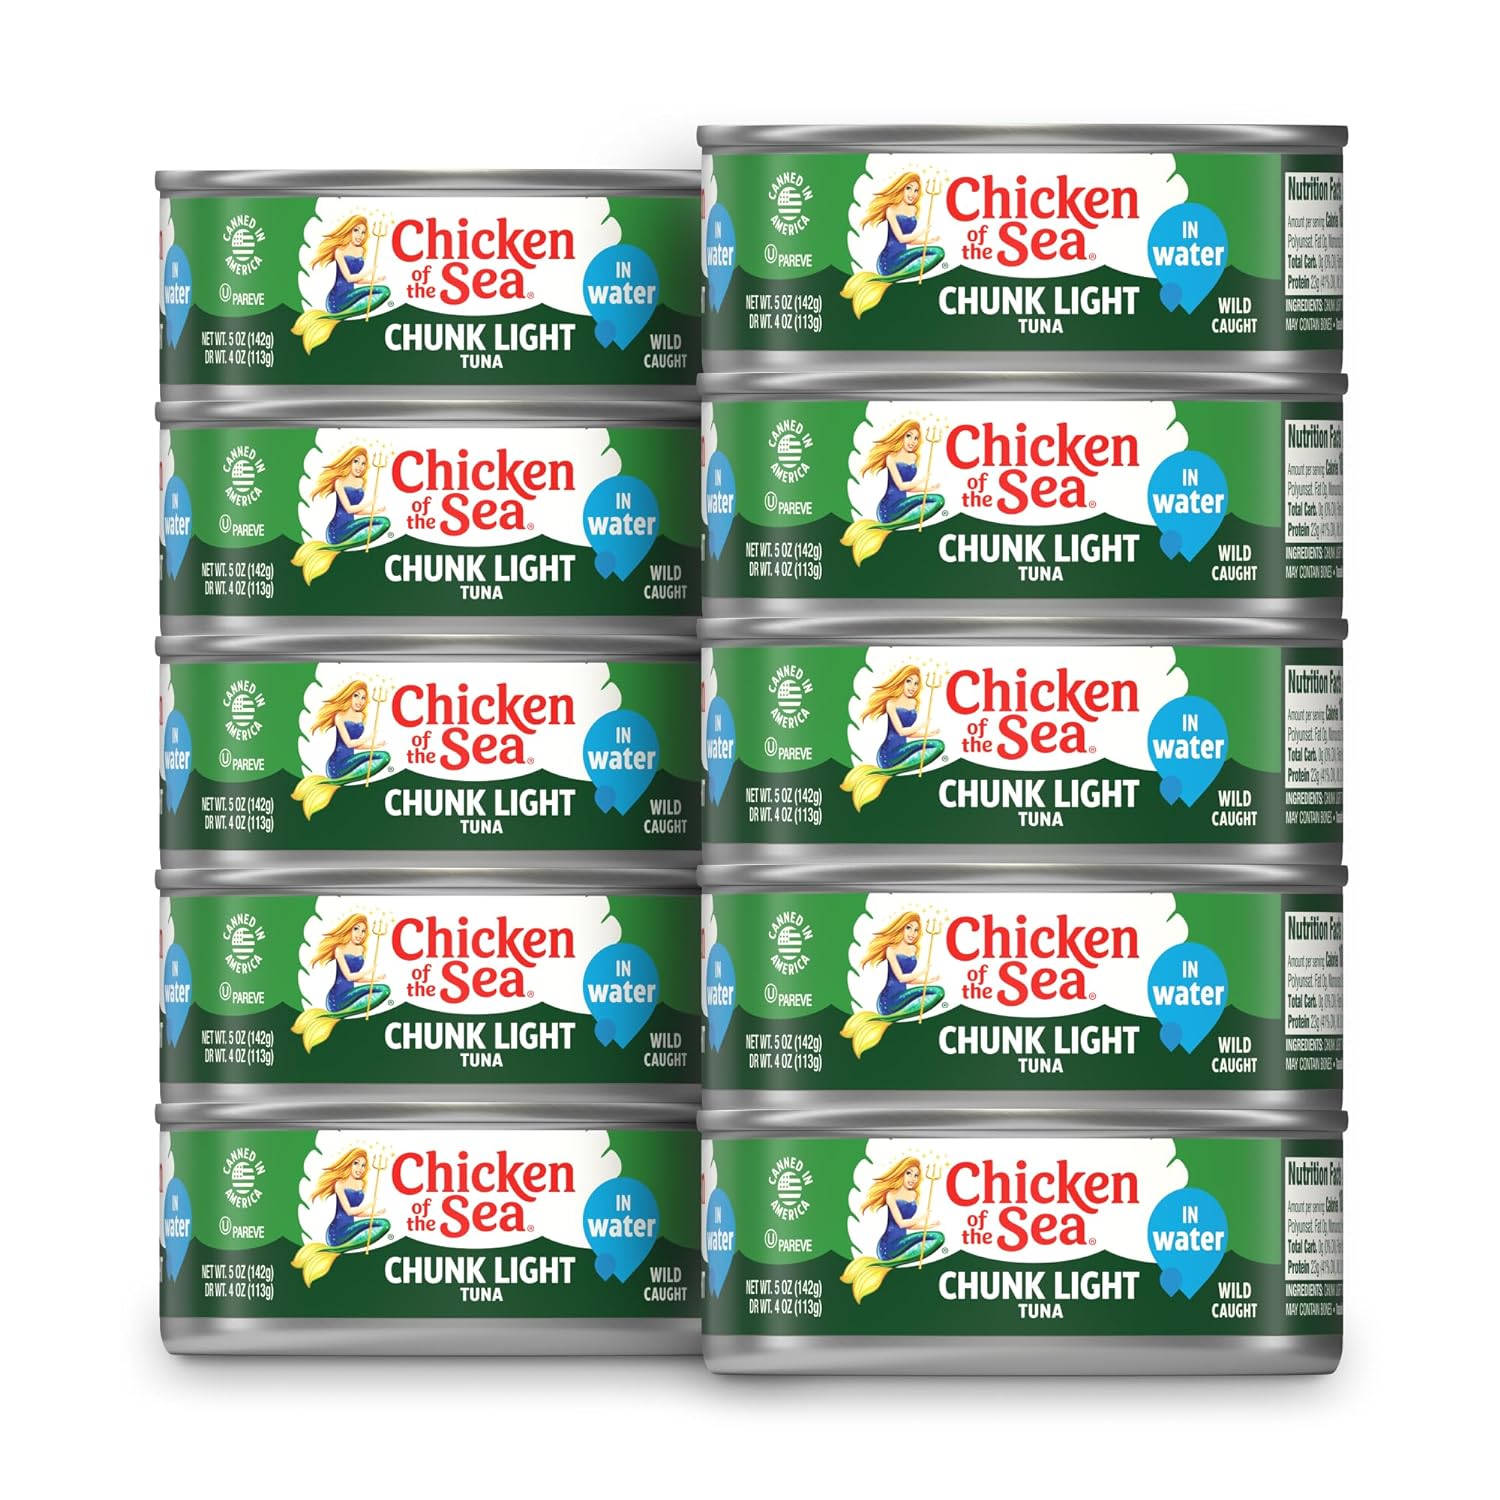 [S&S] $7.57: 10-Pack 5-Oz Chicken of the Sea Chunk Light Tuna in Water at Amazon